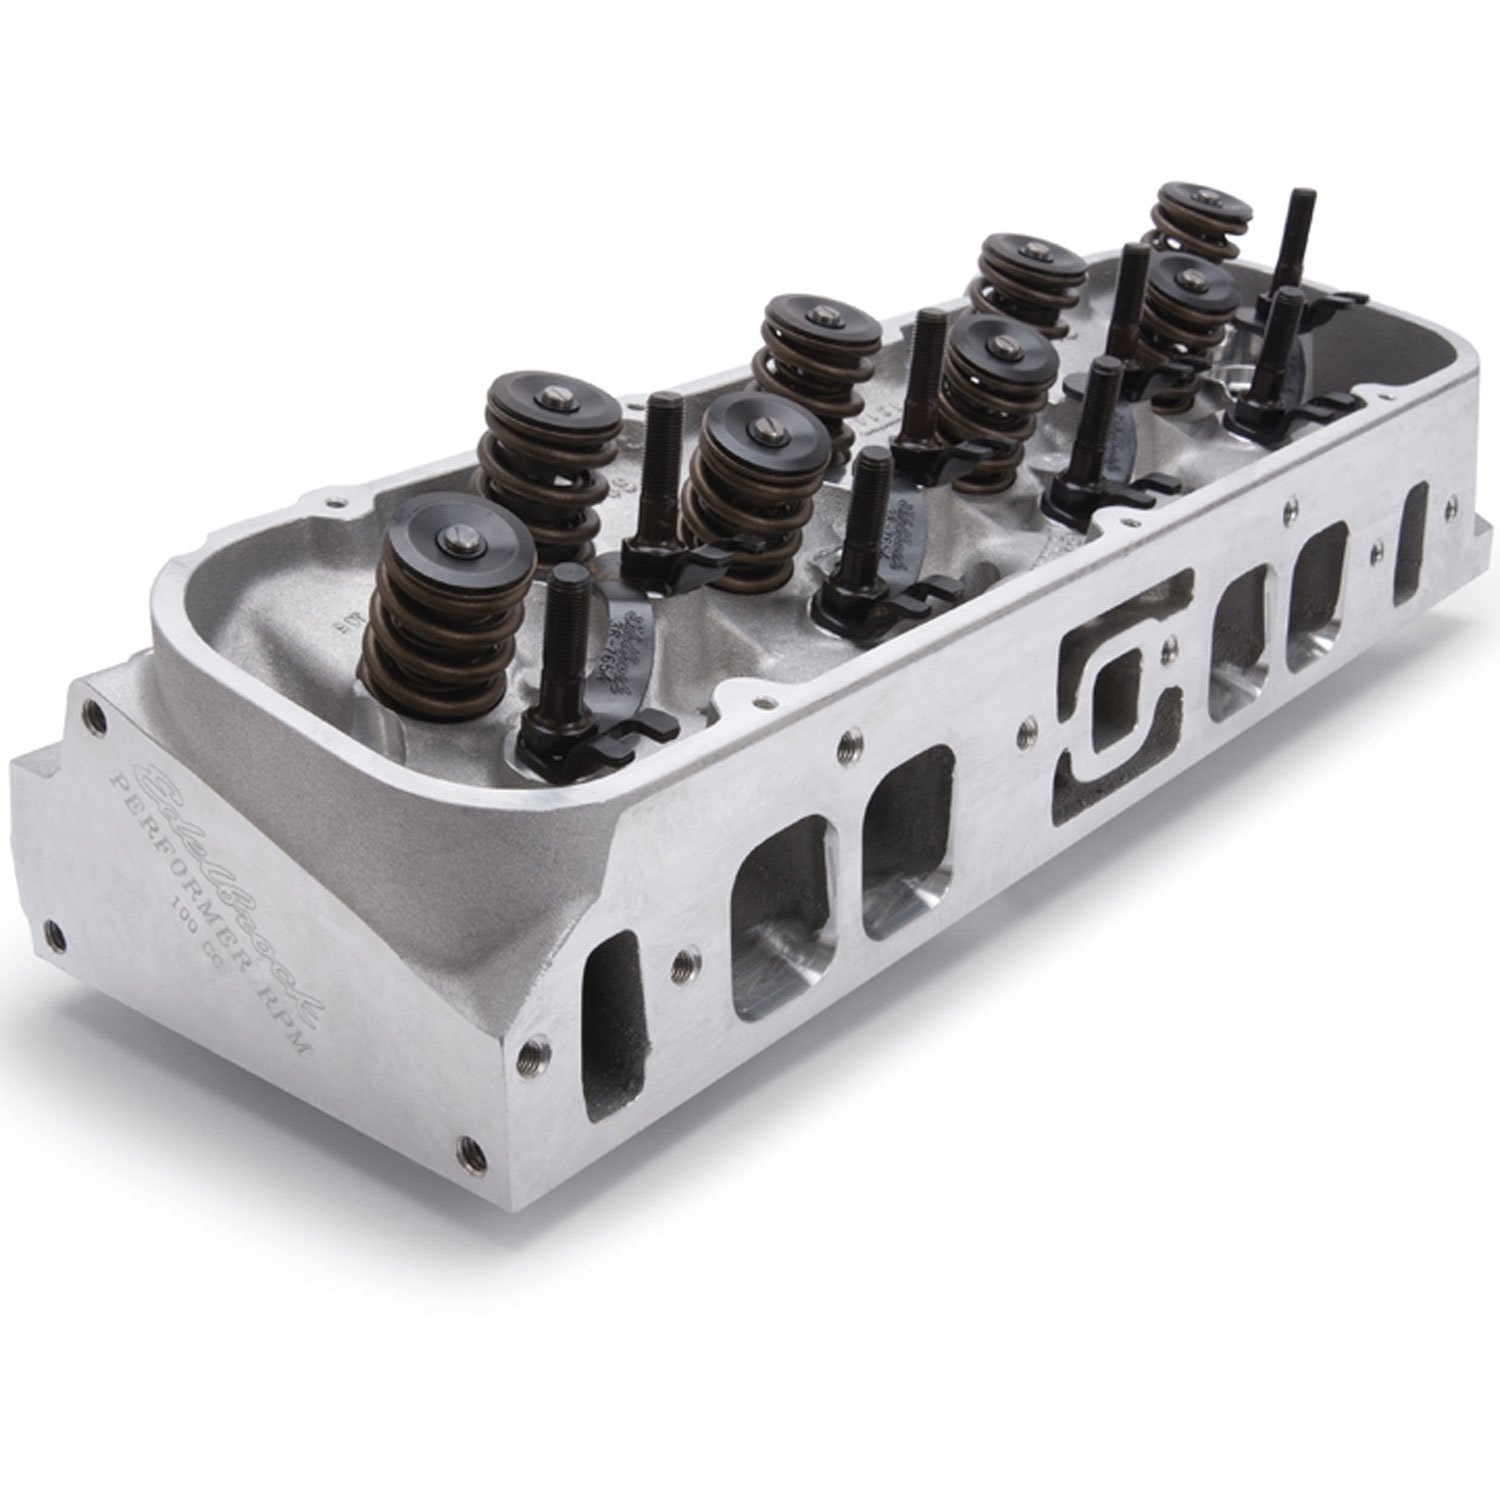 60439 Performer RPM High Compression 454 O-Port Cylinder Heads for Big Block Chevy